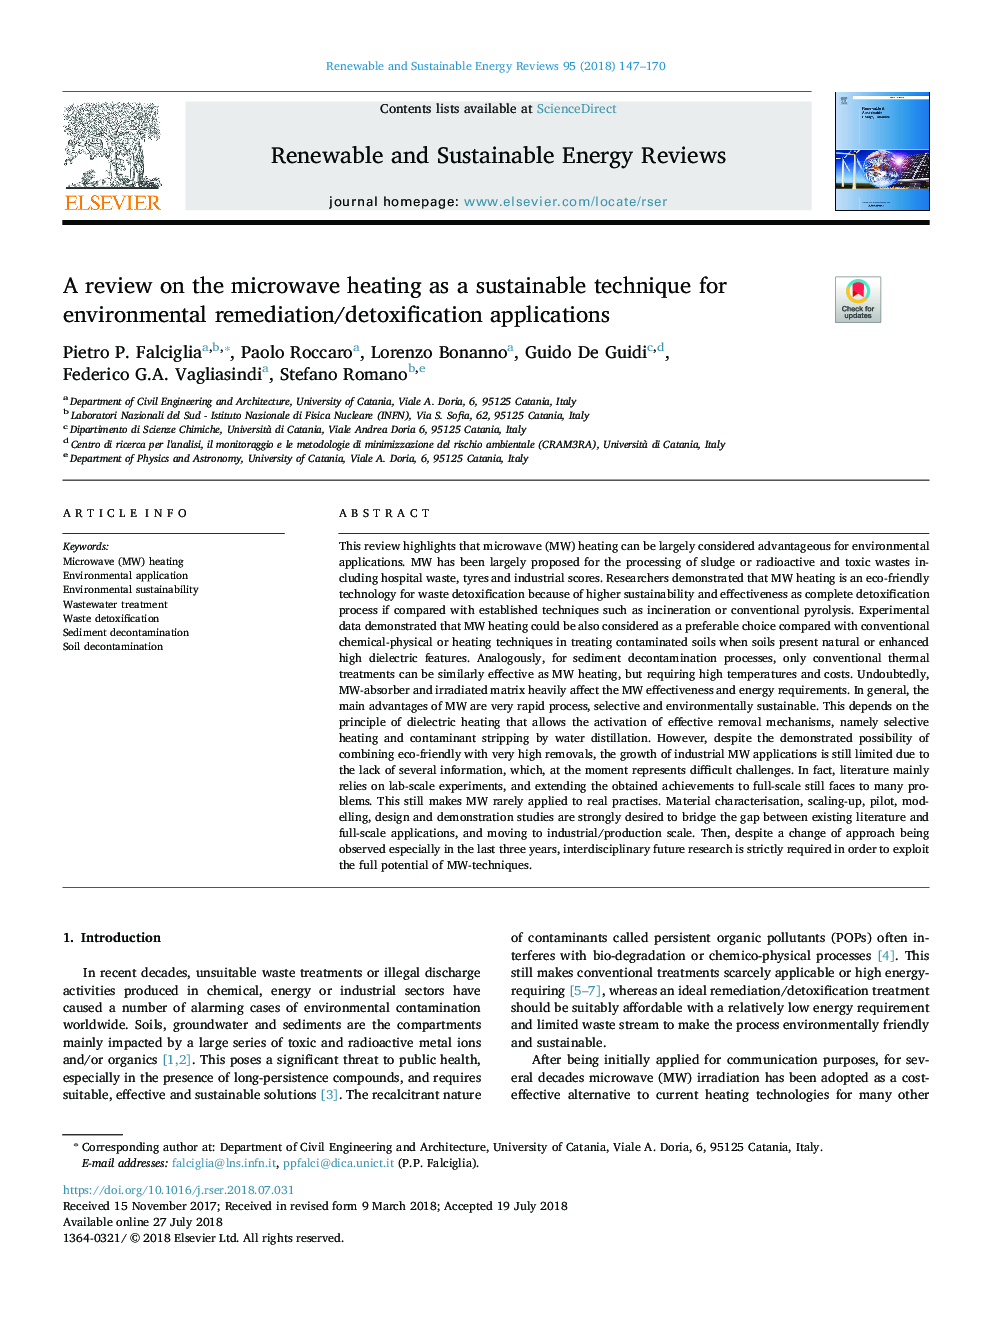 A review on the microwave heating as a sustainable technique for environmental remediation/detoxification applications